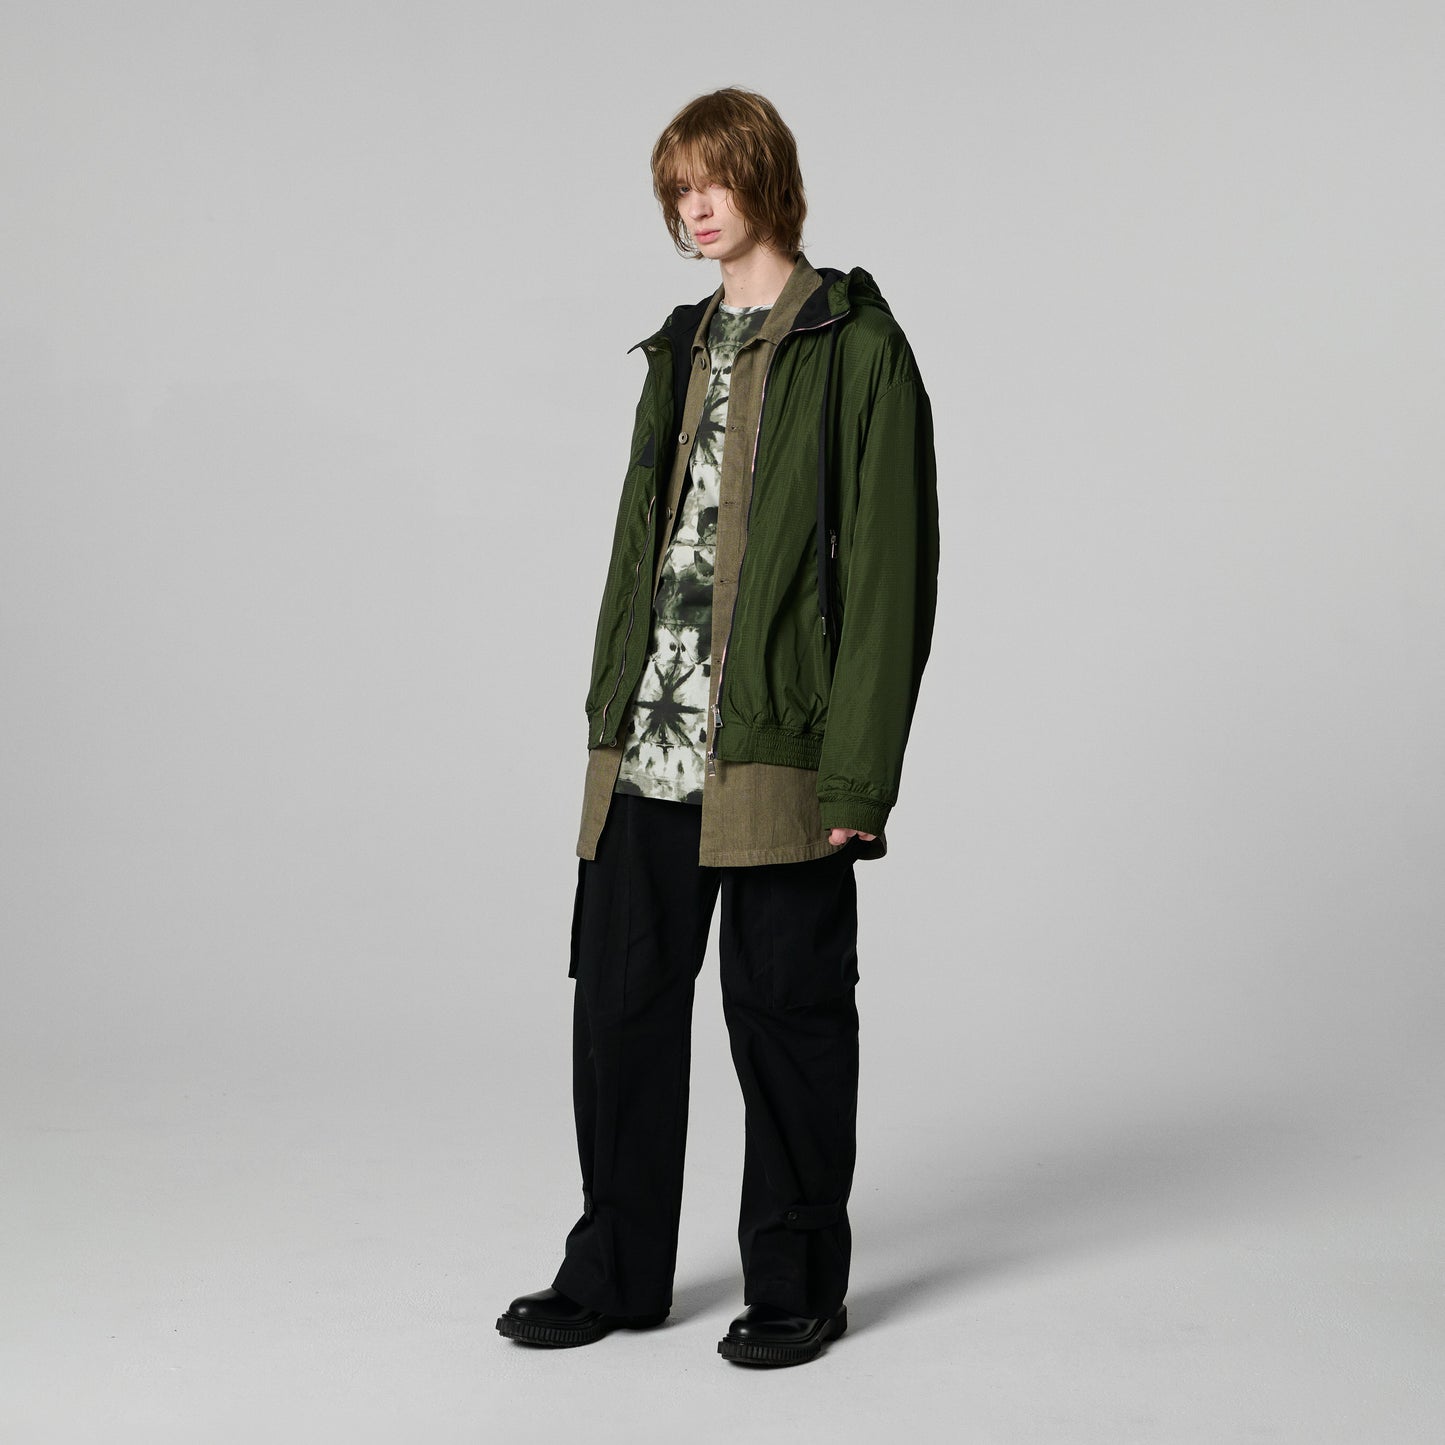 GREEN HYBRID HOODIE IN RECYCLED RIPSTOP NYLON WITH BLACK ORGANIC COTTON FLEECE LINING